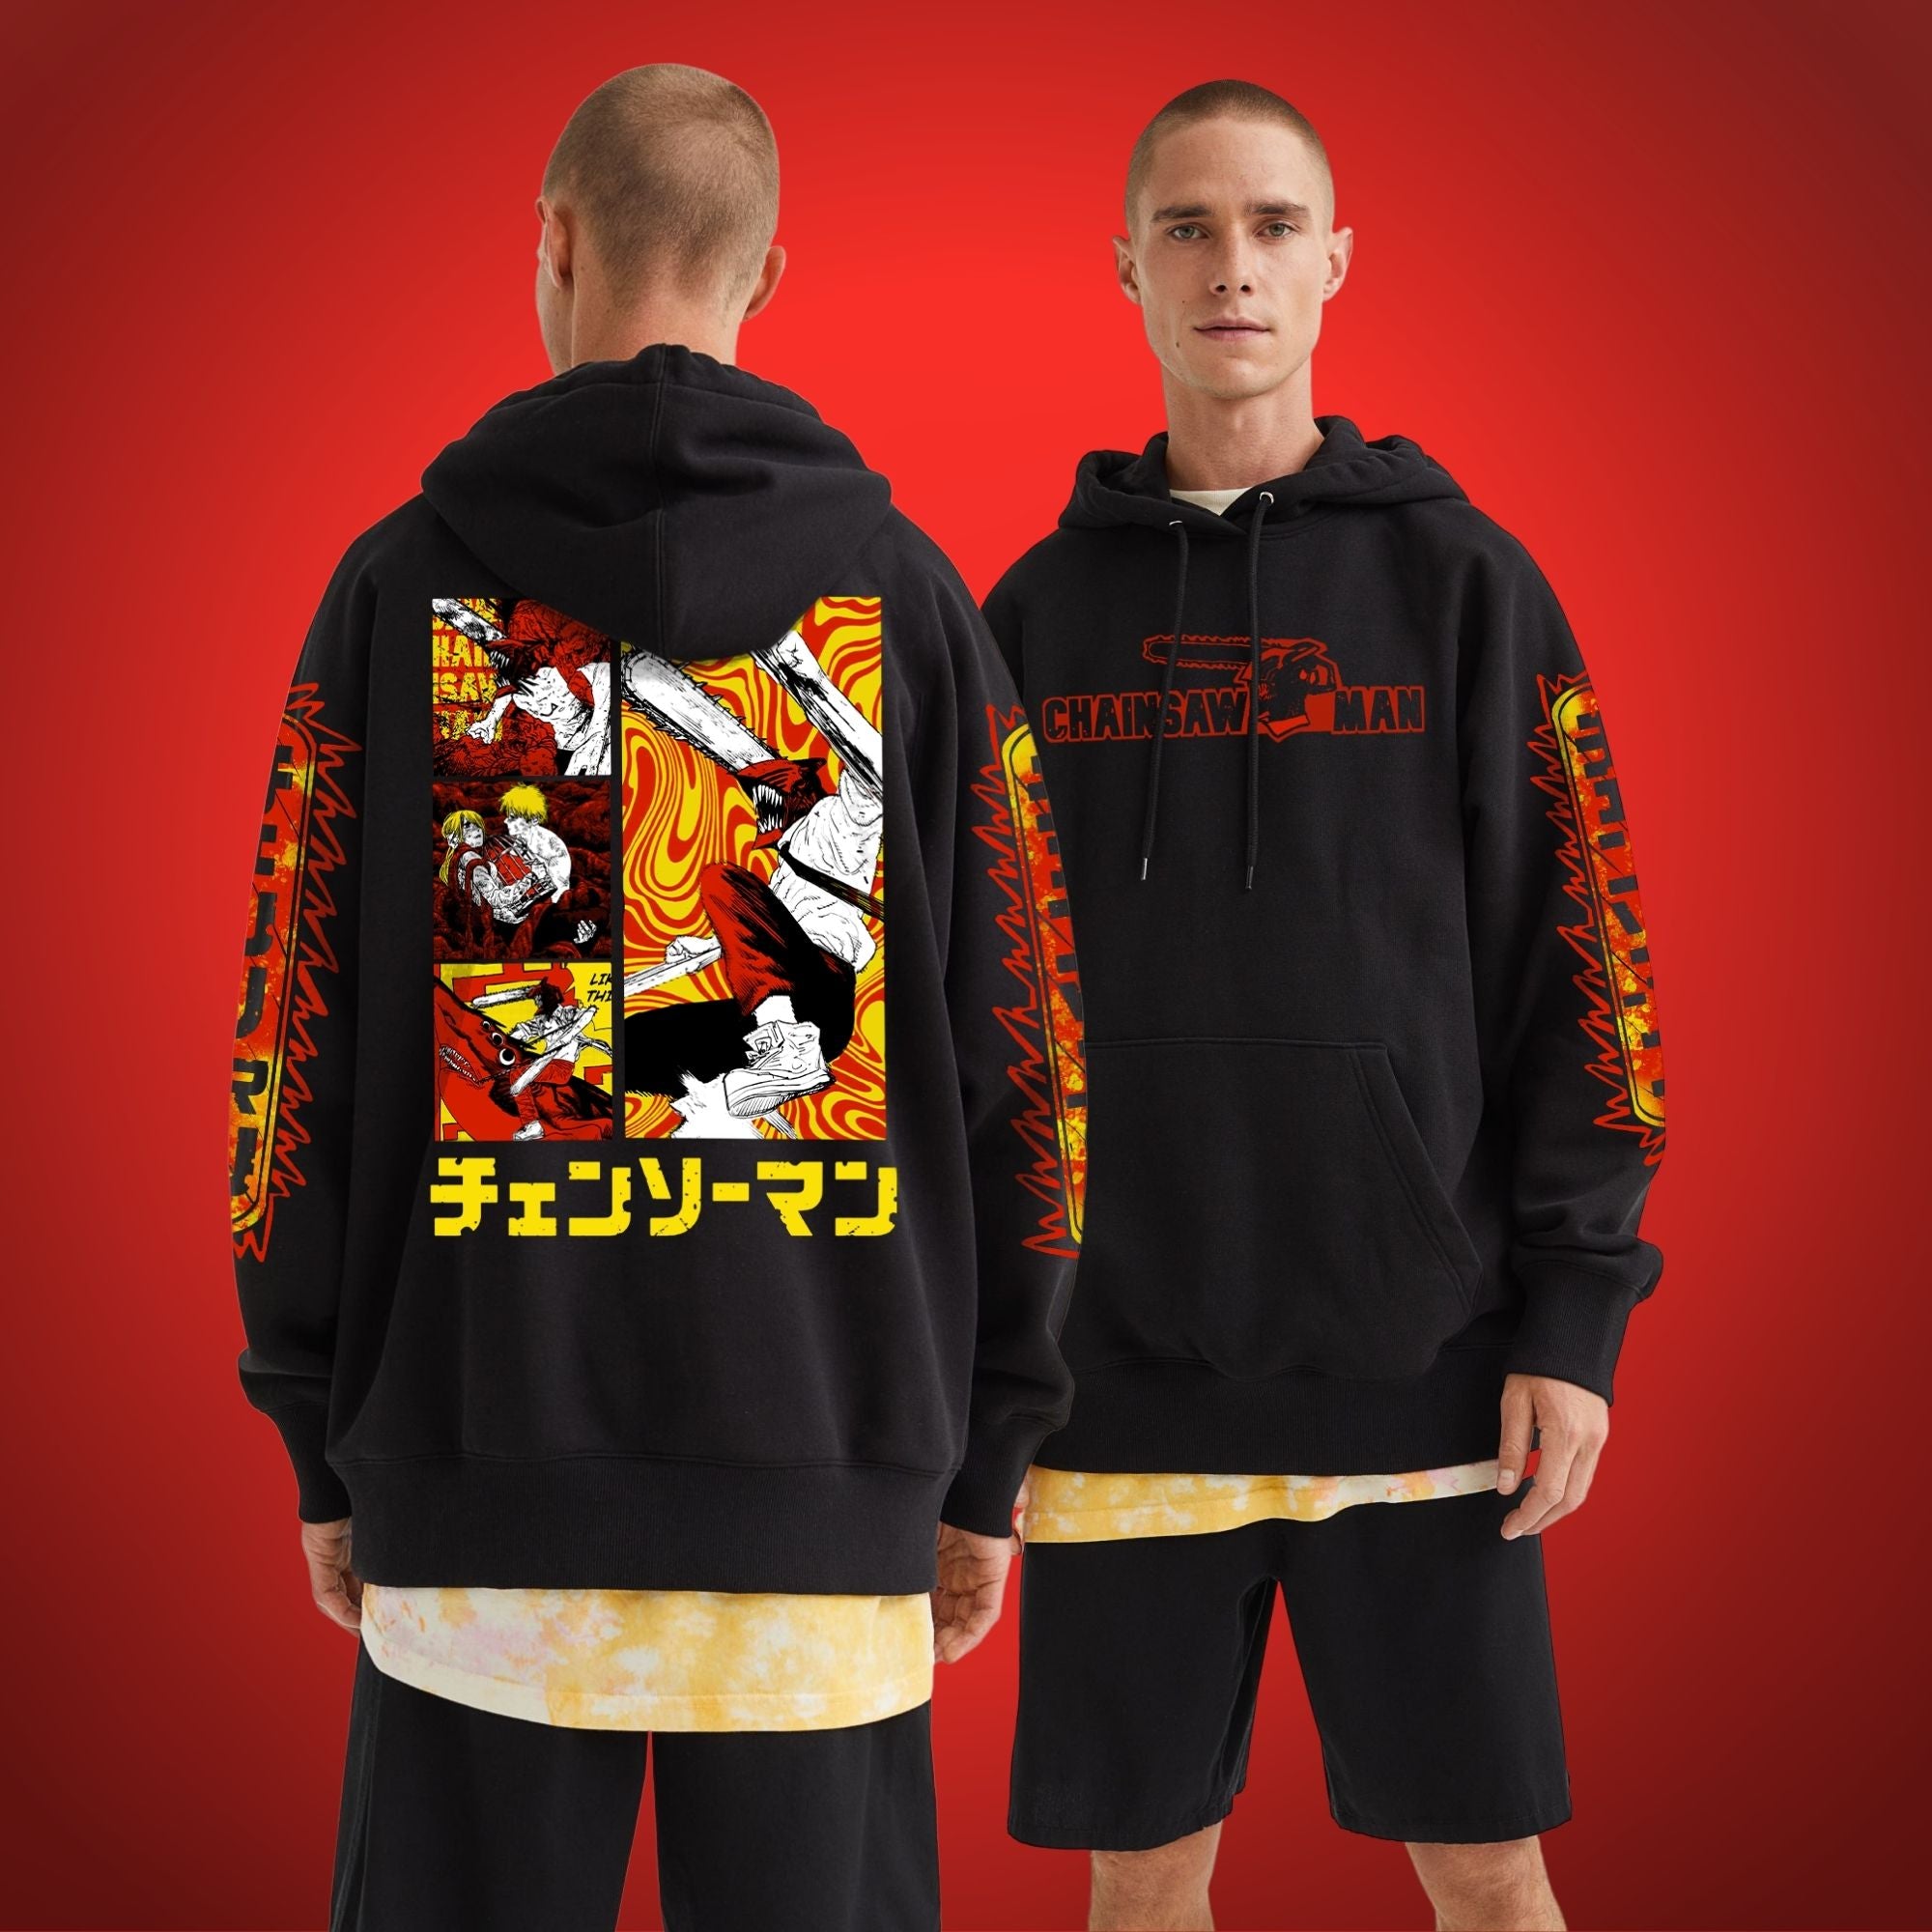 Buy ComicSense.xyz Unisex My Hero Academia Anime Jacket for Men and Women,  Great Explosion Murder God Dynamight Printed Cosplay Anime Bomber Jackets -  Medium at Amazon.in